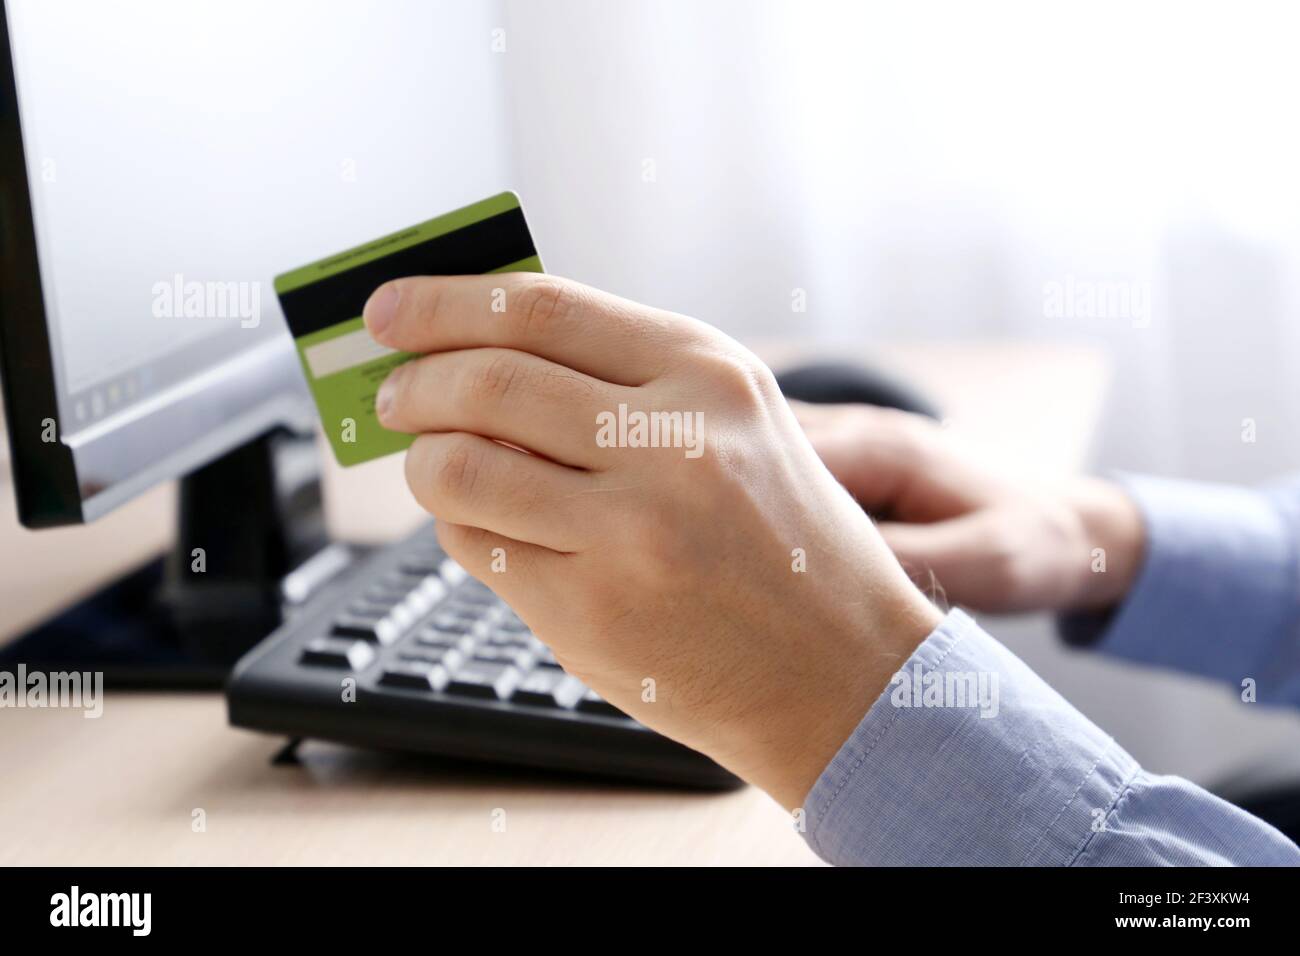 Man holding credit bank card types on PC keyboard. Concept of online shopping and payment, financial transaction Stock Photo